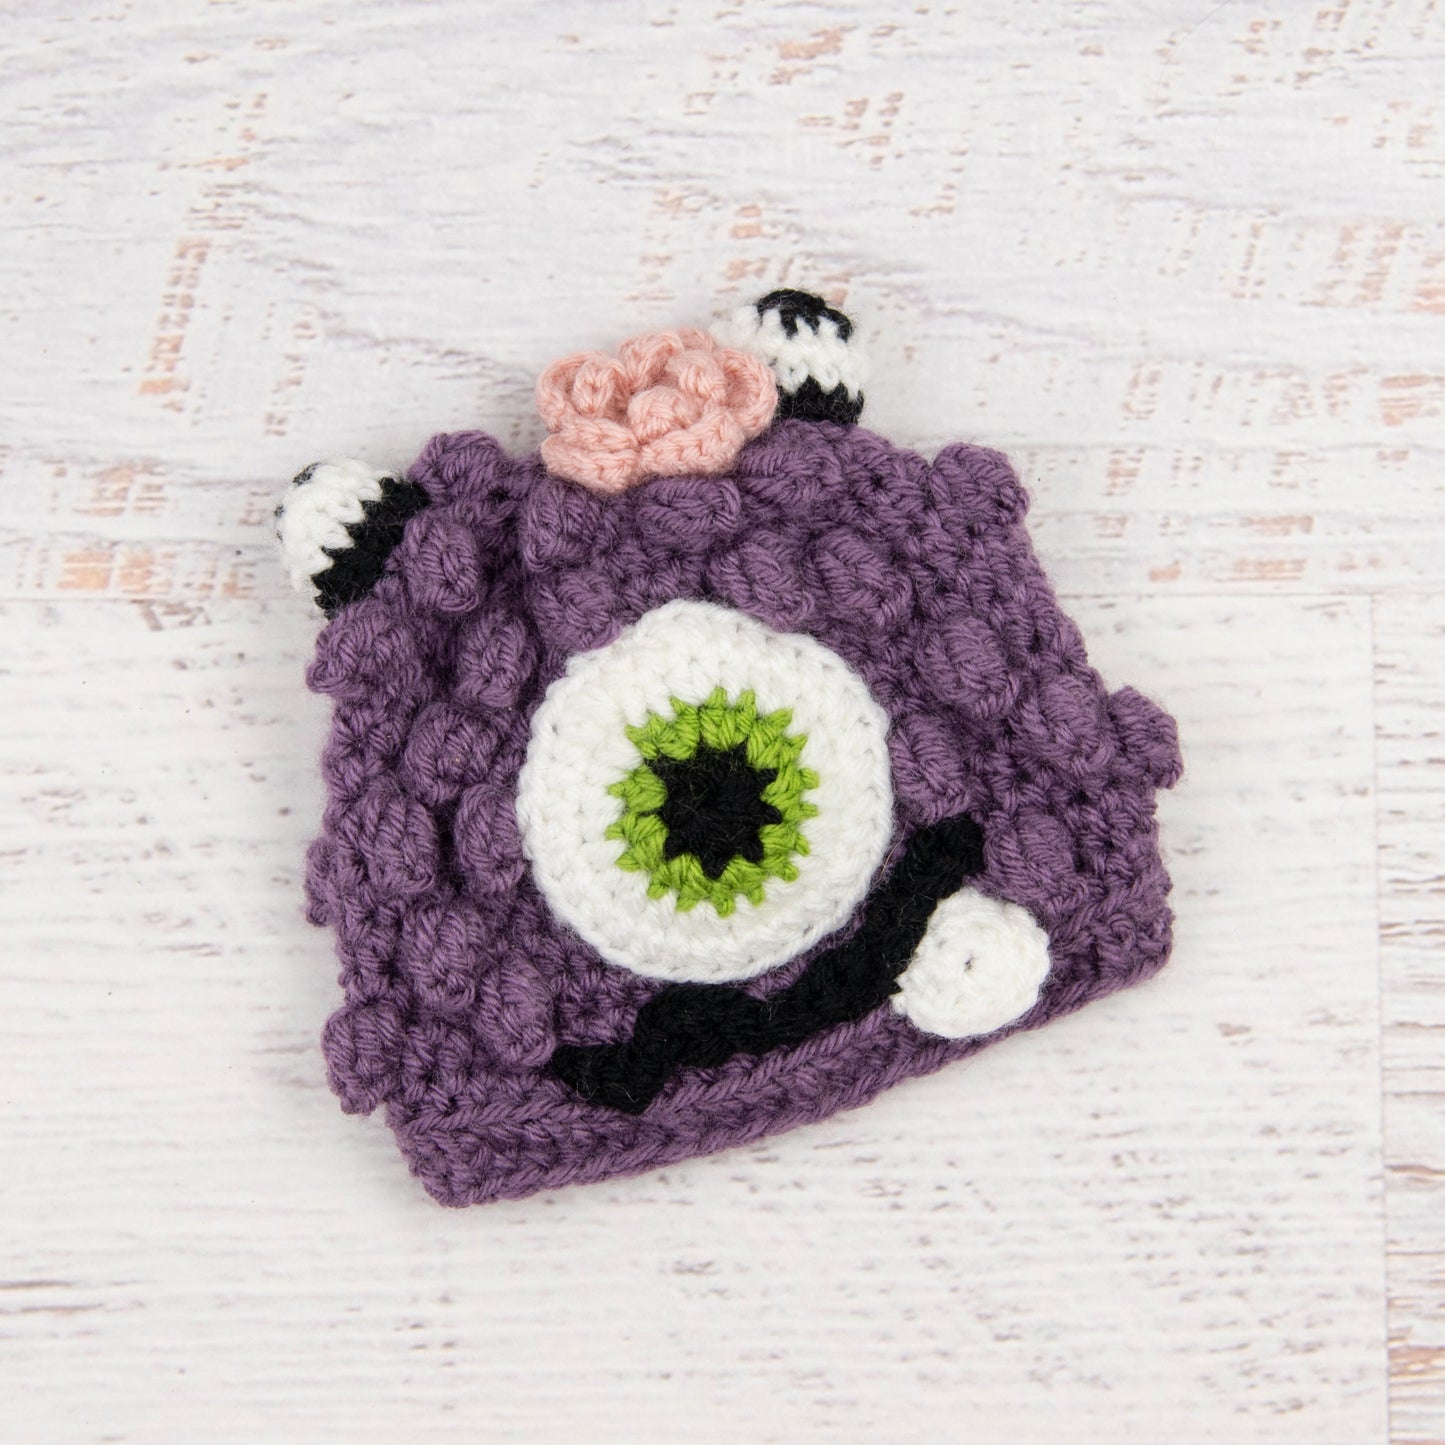 In-Stock 0-6 Month Little Monster in Dusty Purple with Fern Eye and Pink Flower.